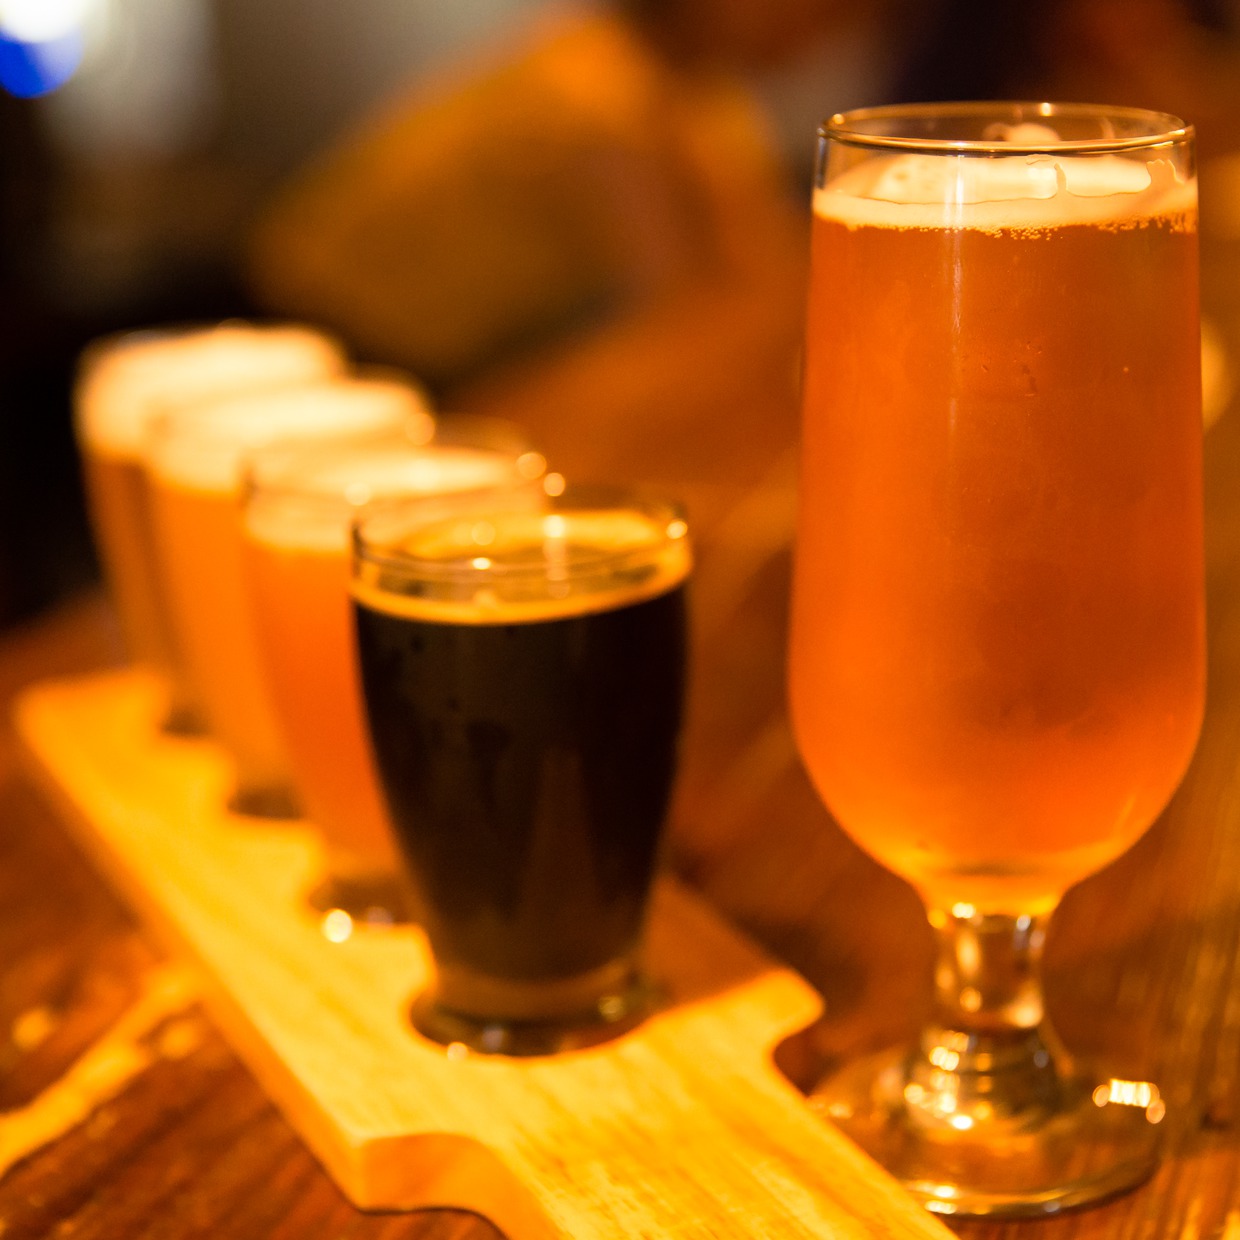 On the 9th Day of Bushwick Christmas, My True Love Gave to Me…9 Beers at The Sampler!